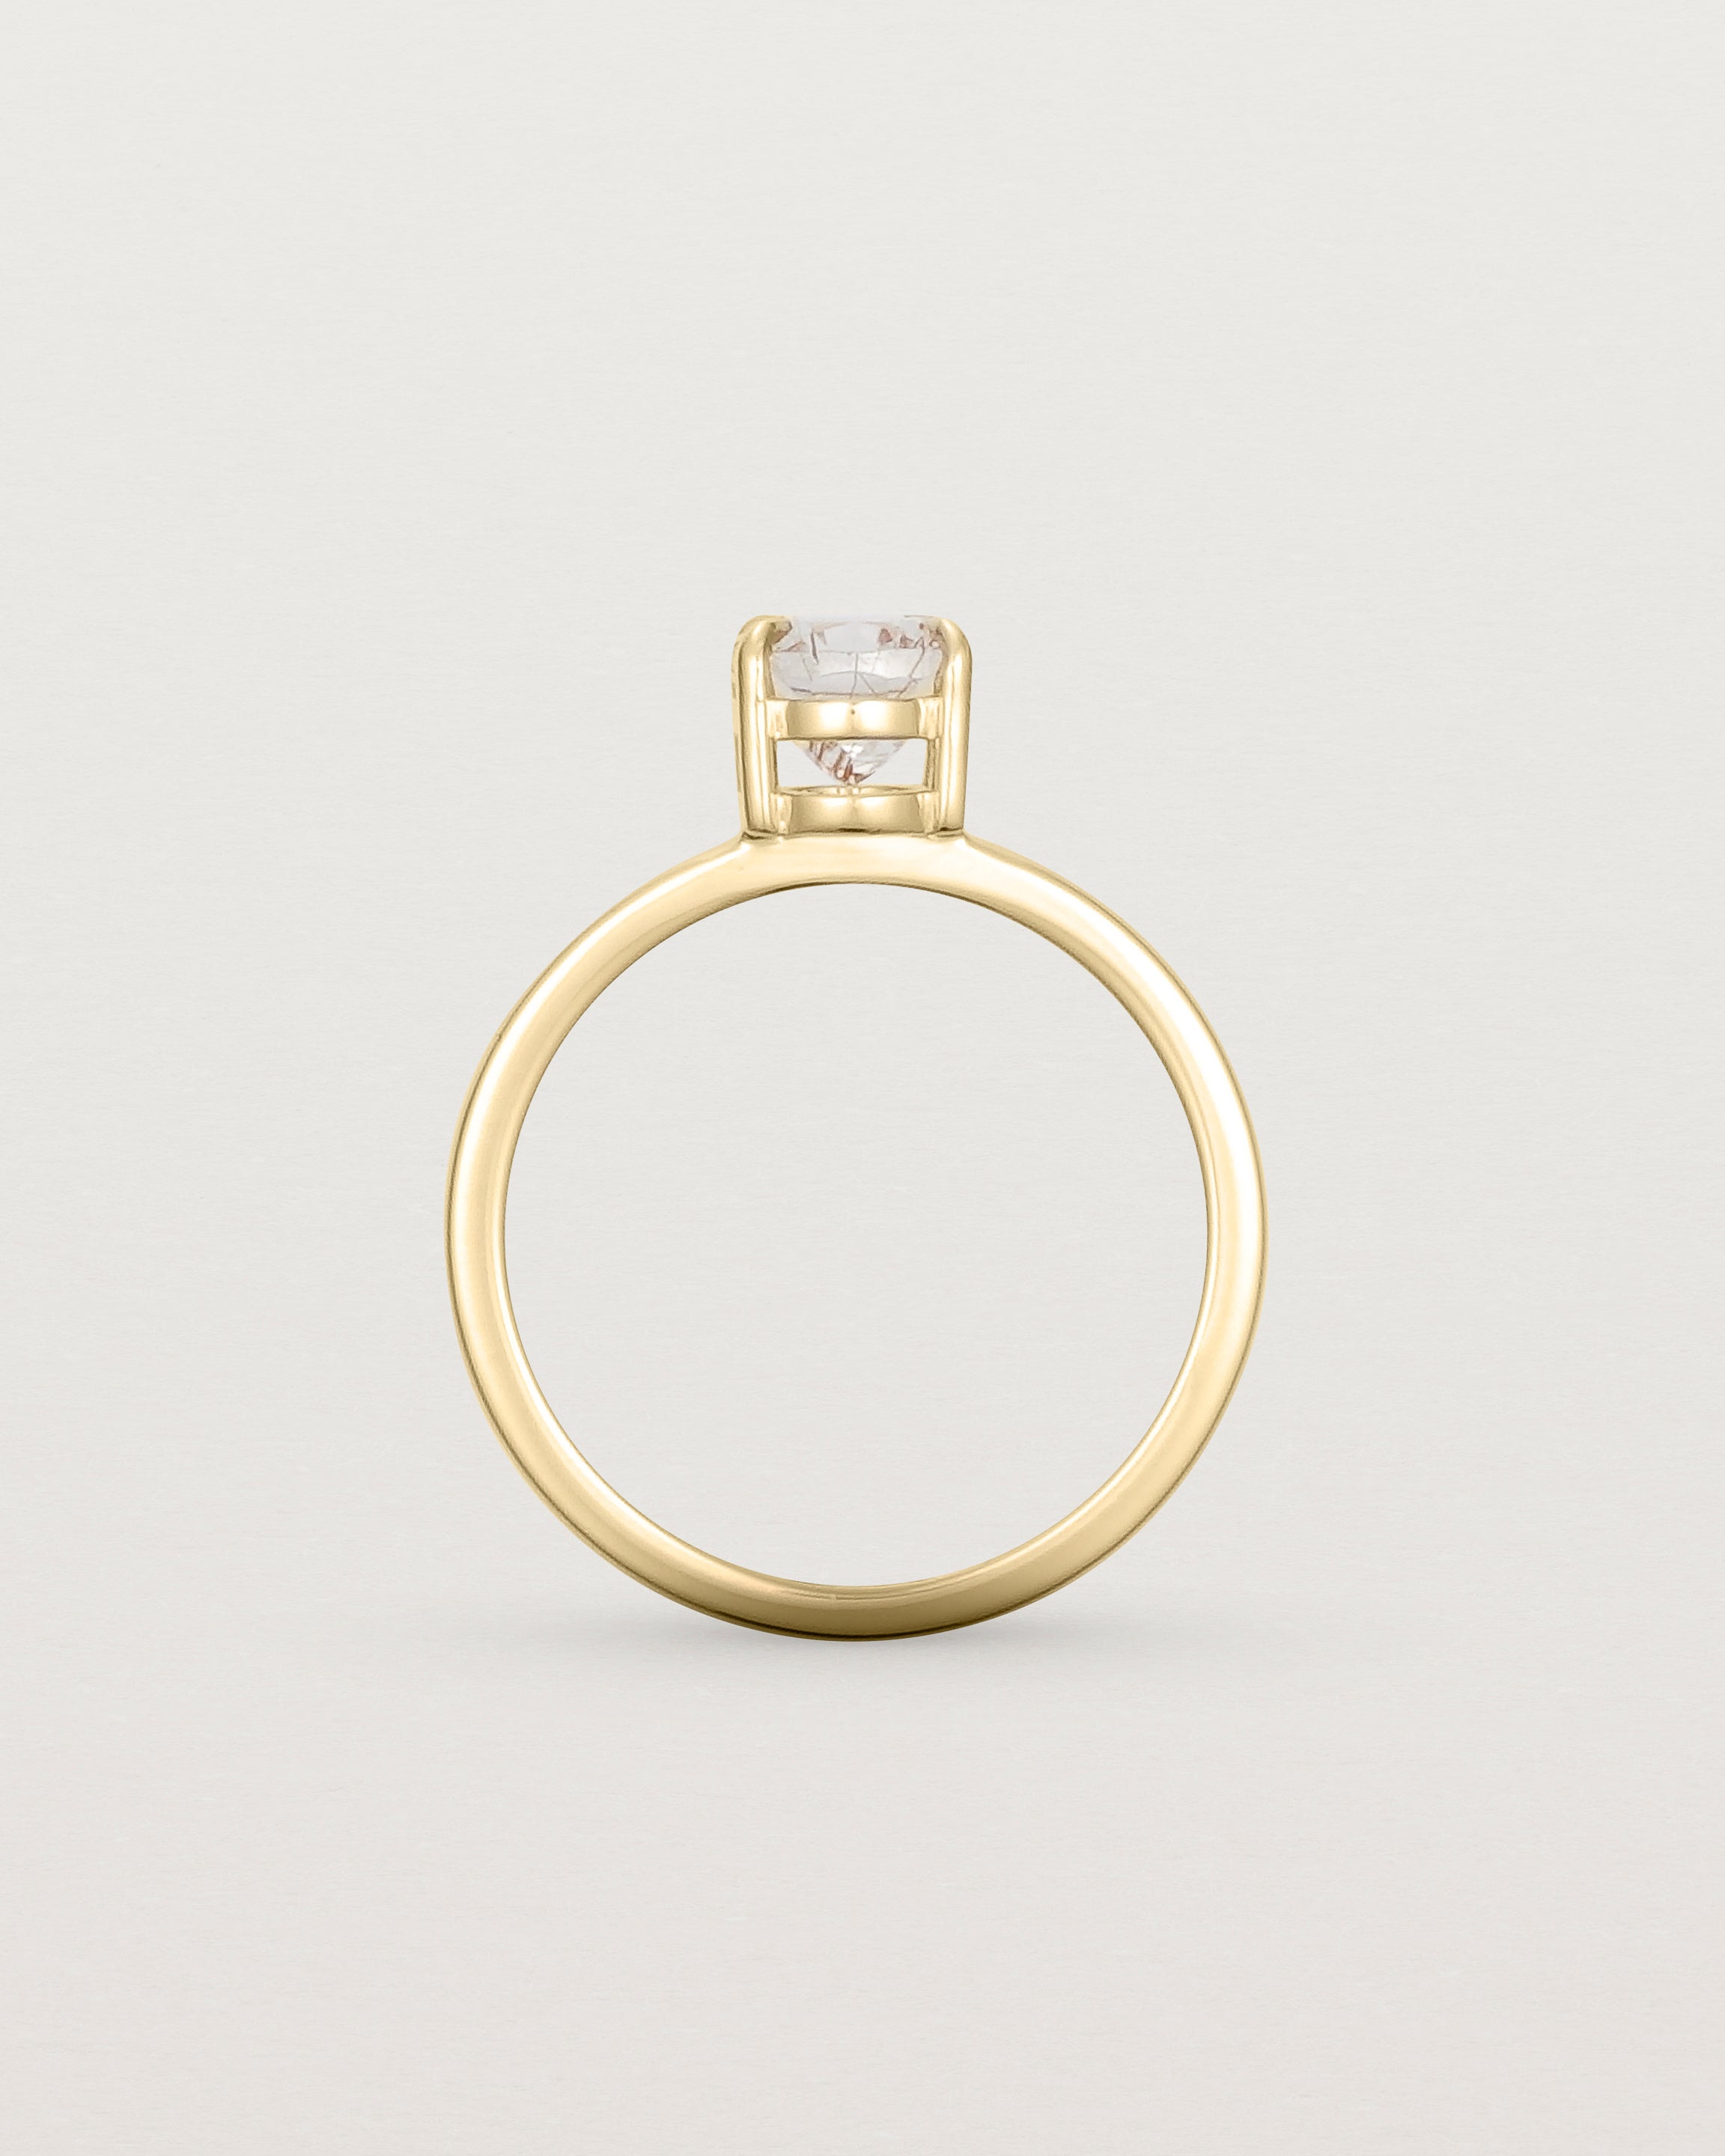 Standing view of the Una Oval Solitaire | Rutilated Quartz | Yellow Gold.